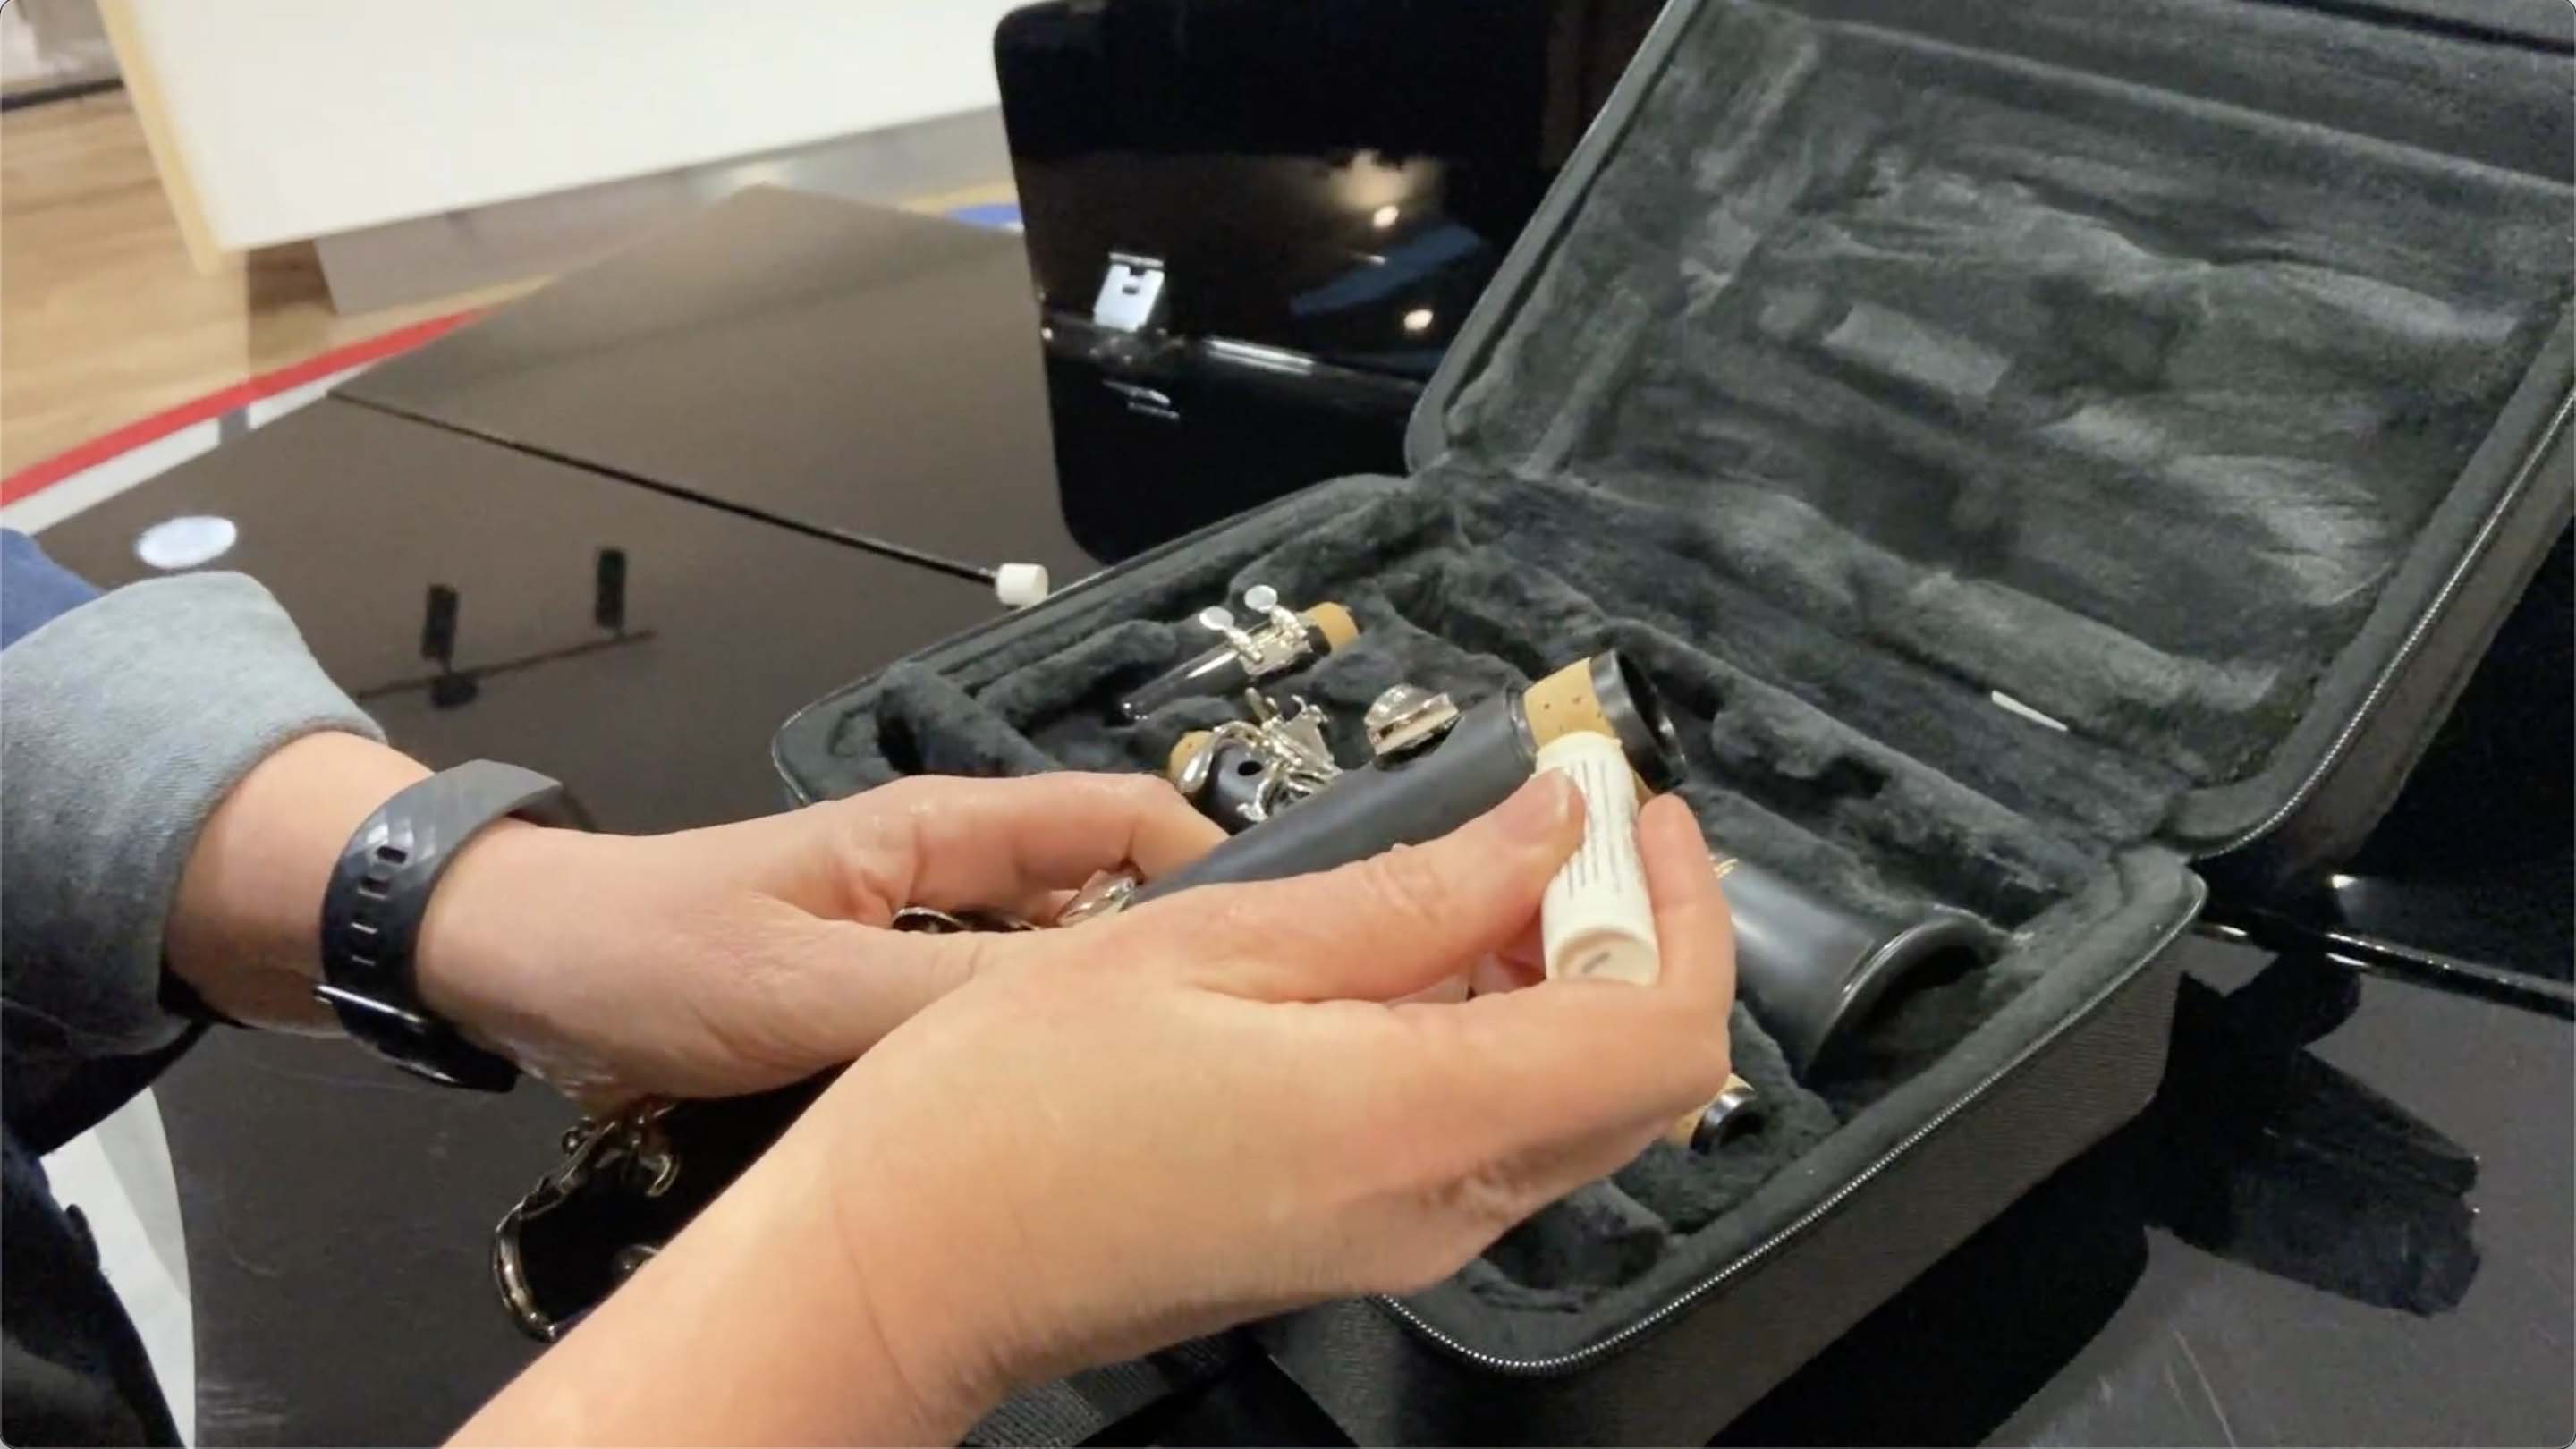 Grease is being appleid to the corks of the clarinet's bottom joint. The case with the other parts is sitting in the background.